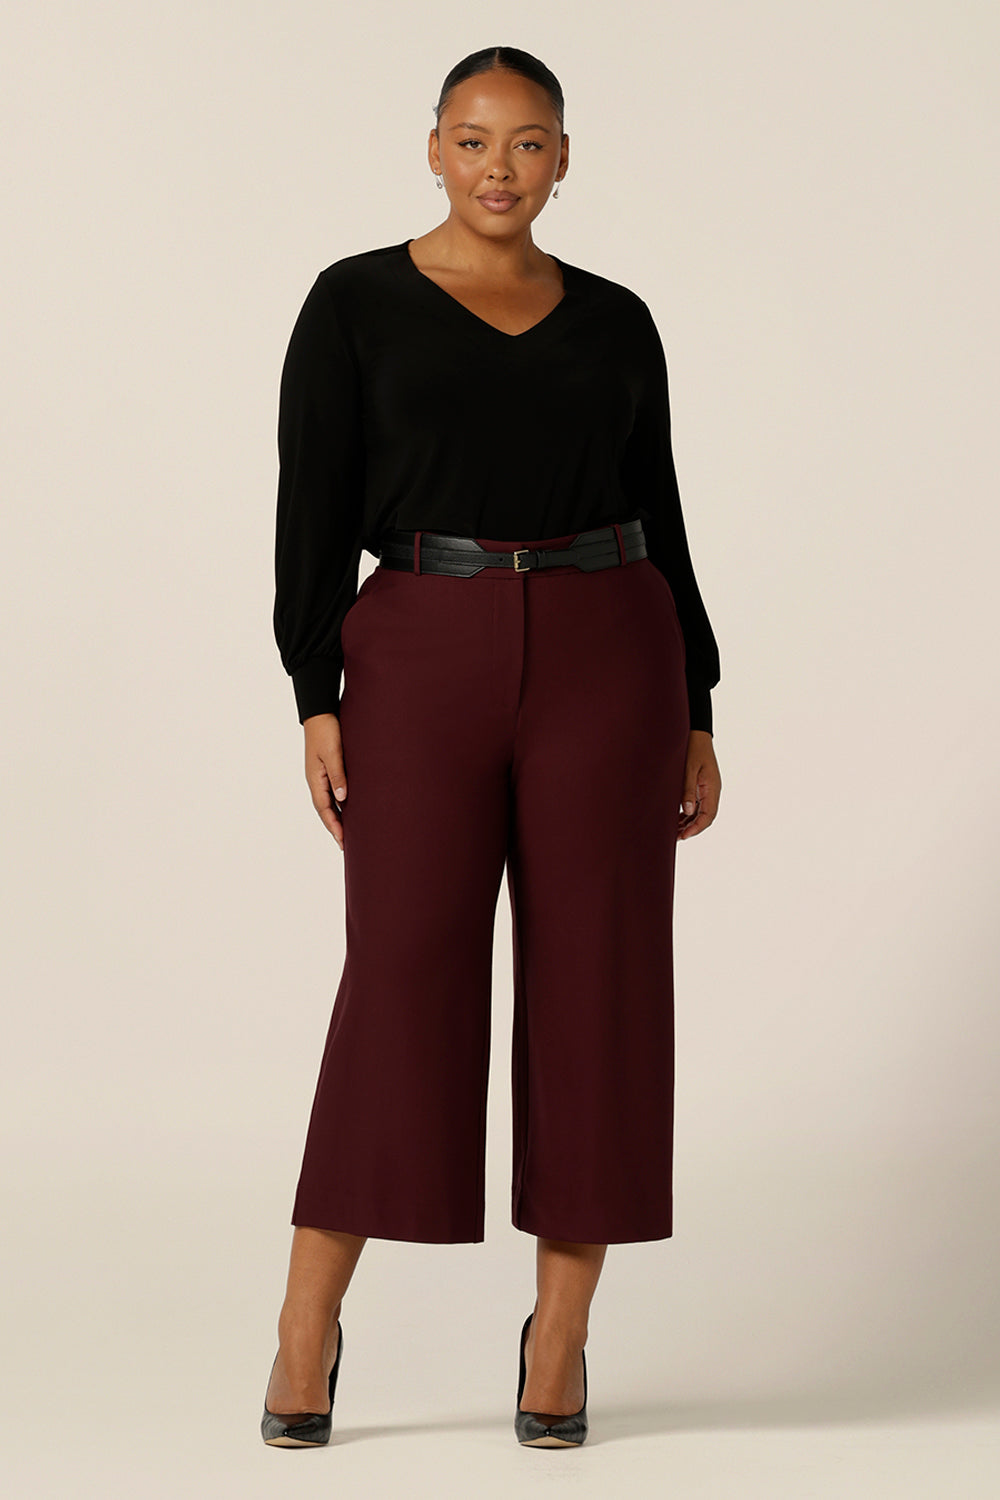 A size 18, curvy woman wears wide leg, cropped length, tailored pants in Mulberry ponte jersey with a long sleeve, V neck top in black jersey. Made in Australia by Australian and New Zealand women's clothing label, L&F, these easy care pants work for corporate wear and weekend wear.